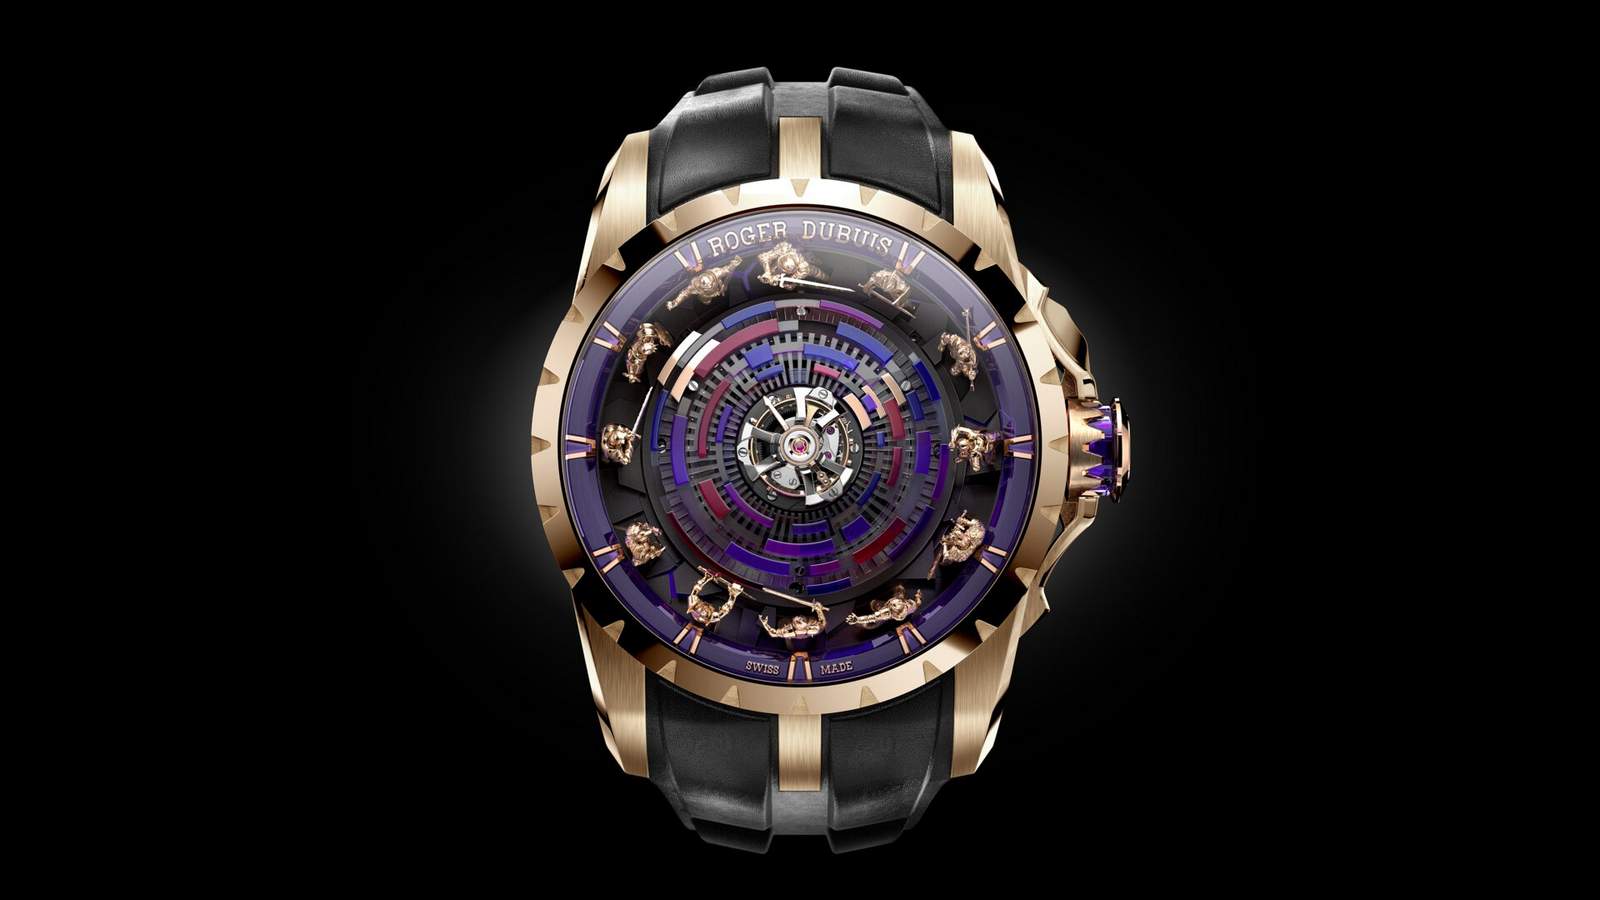 Twelve knights battle against gravity to tell the time on this $620,000 Roger Dubuis wristwatch